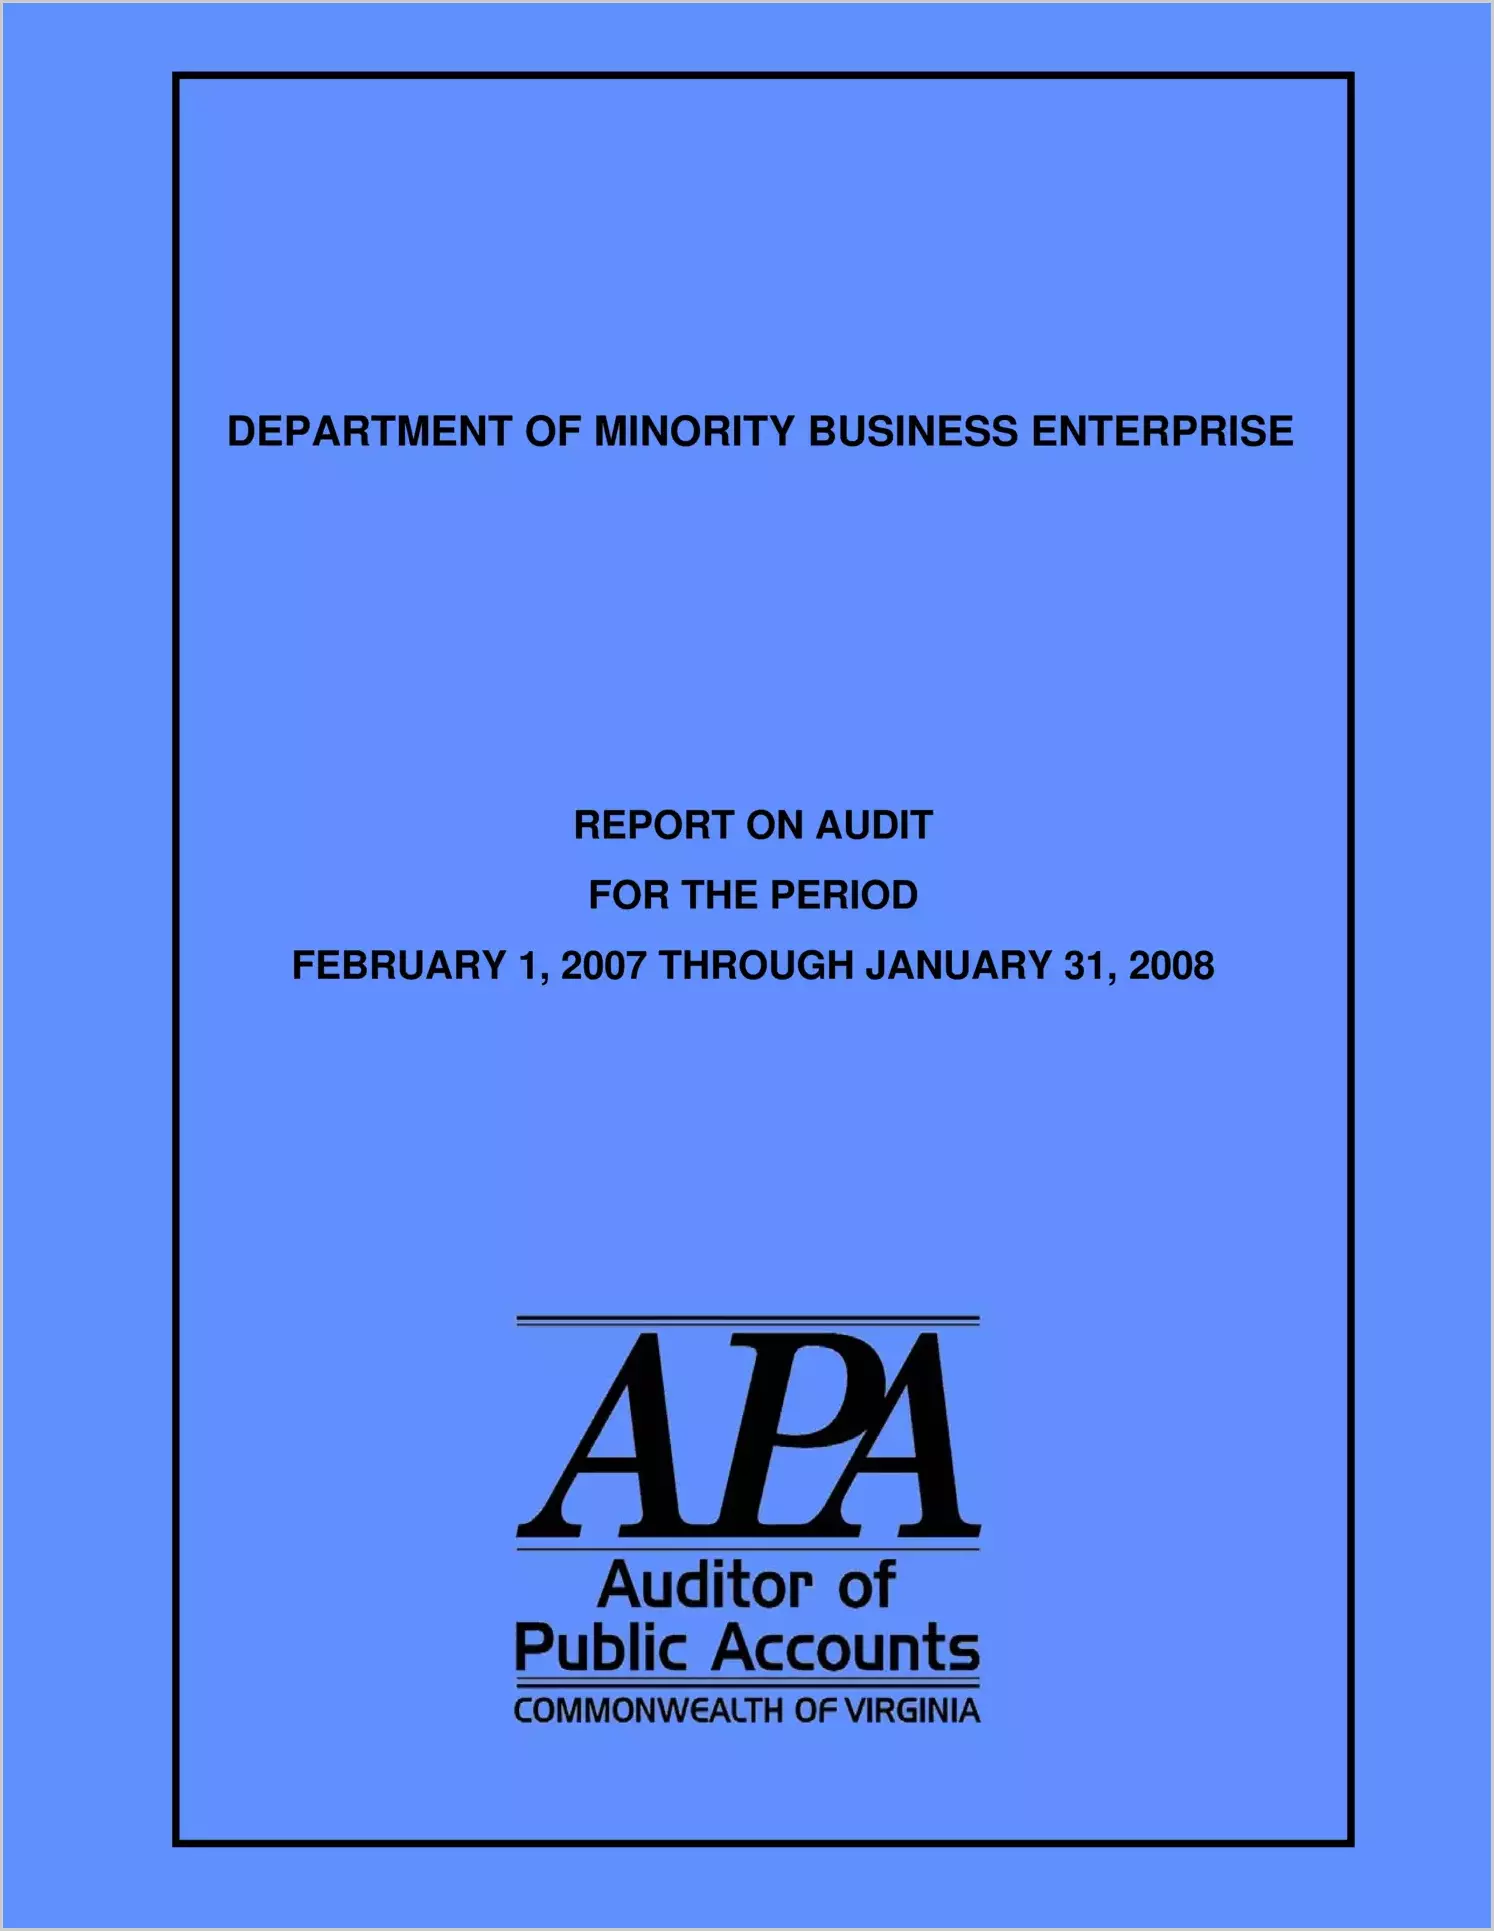 Department of Minority Business Enterprise report on audit for the period February 1, 2007 through January 31, 2008